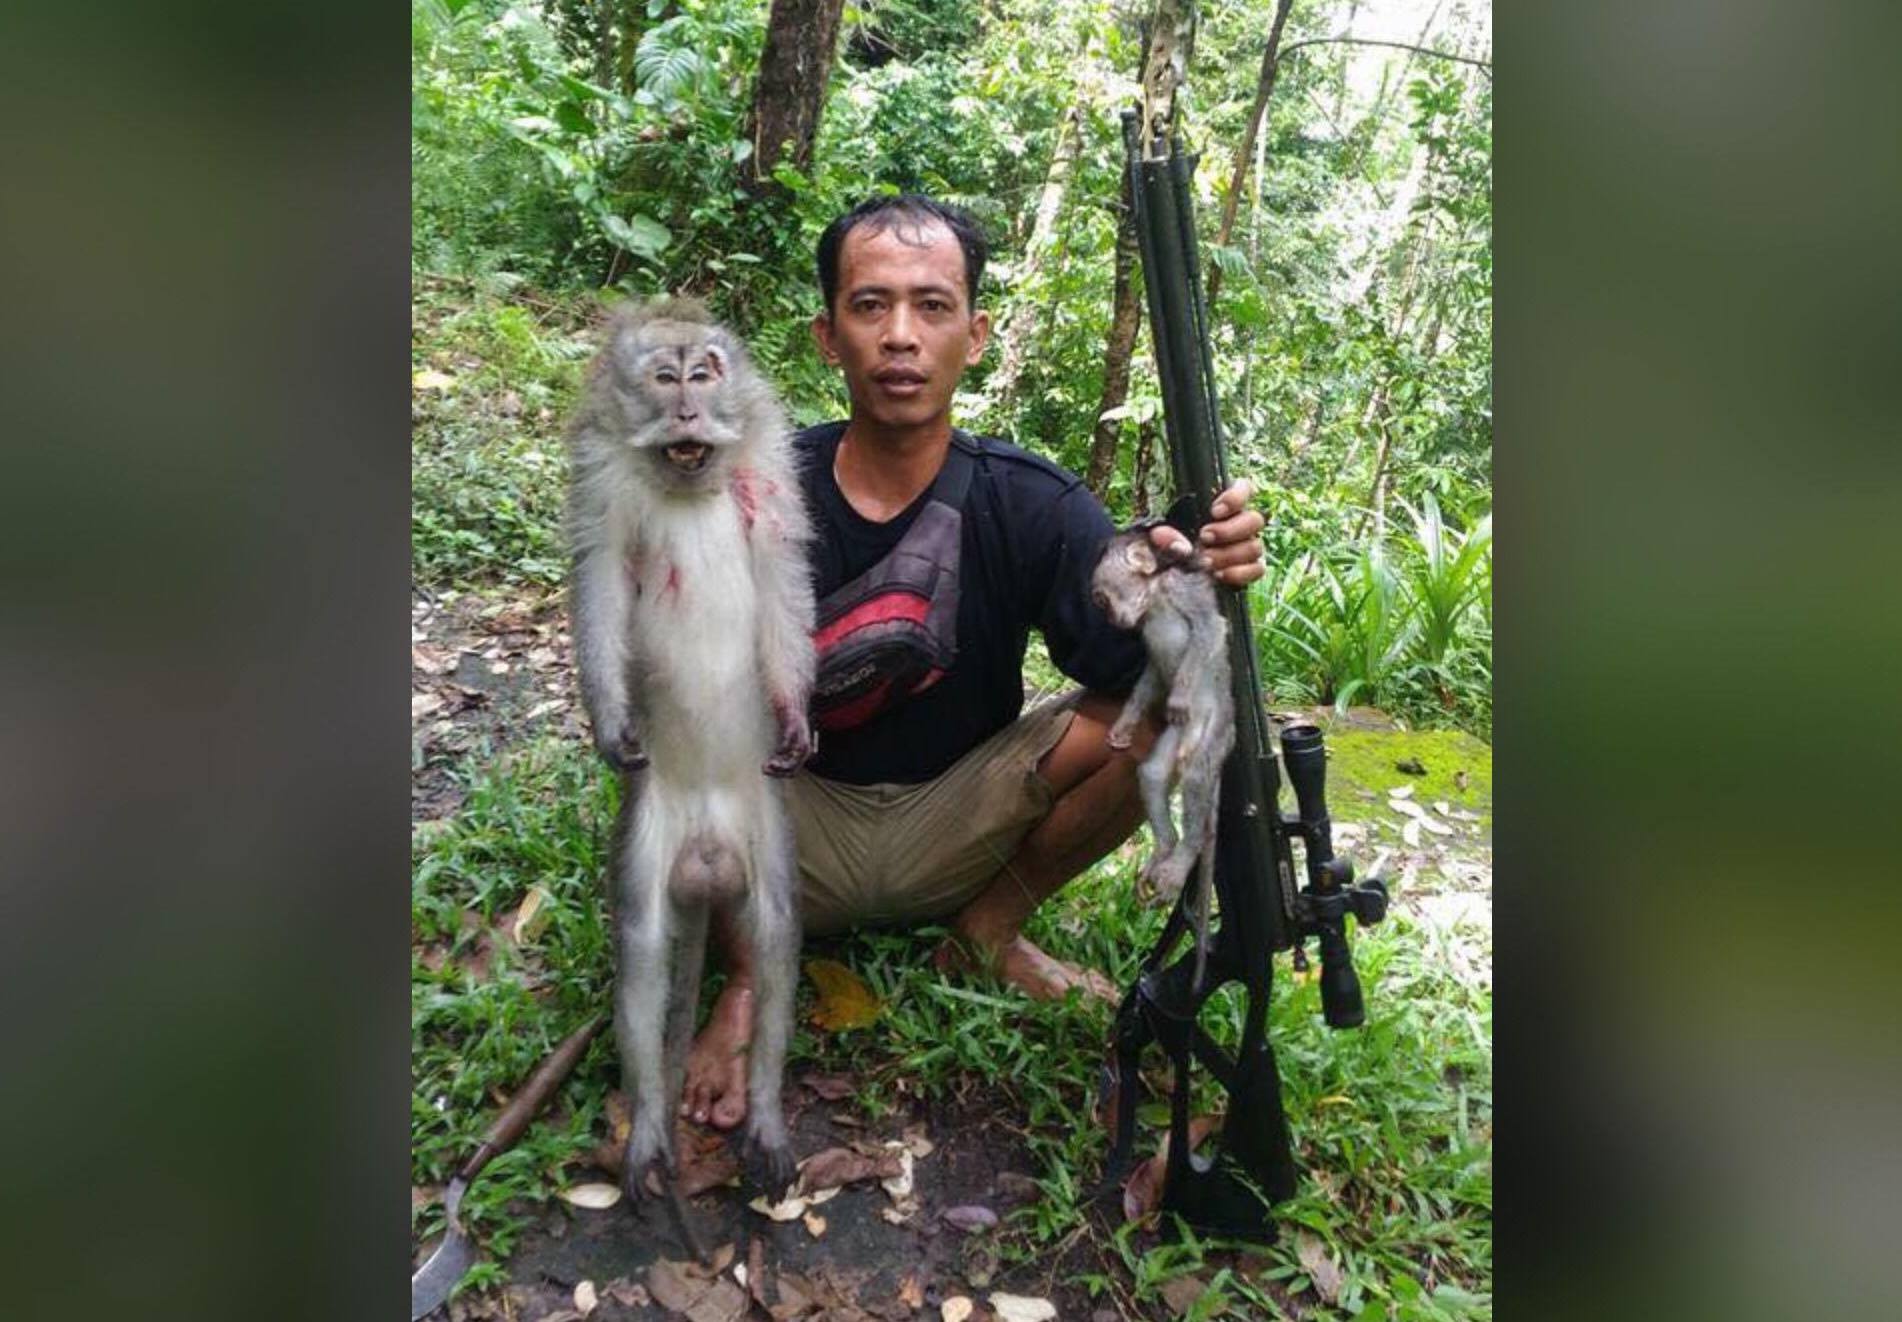 People are outraged over this Bali man’s photos posing with dead monkey